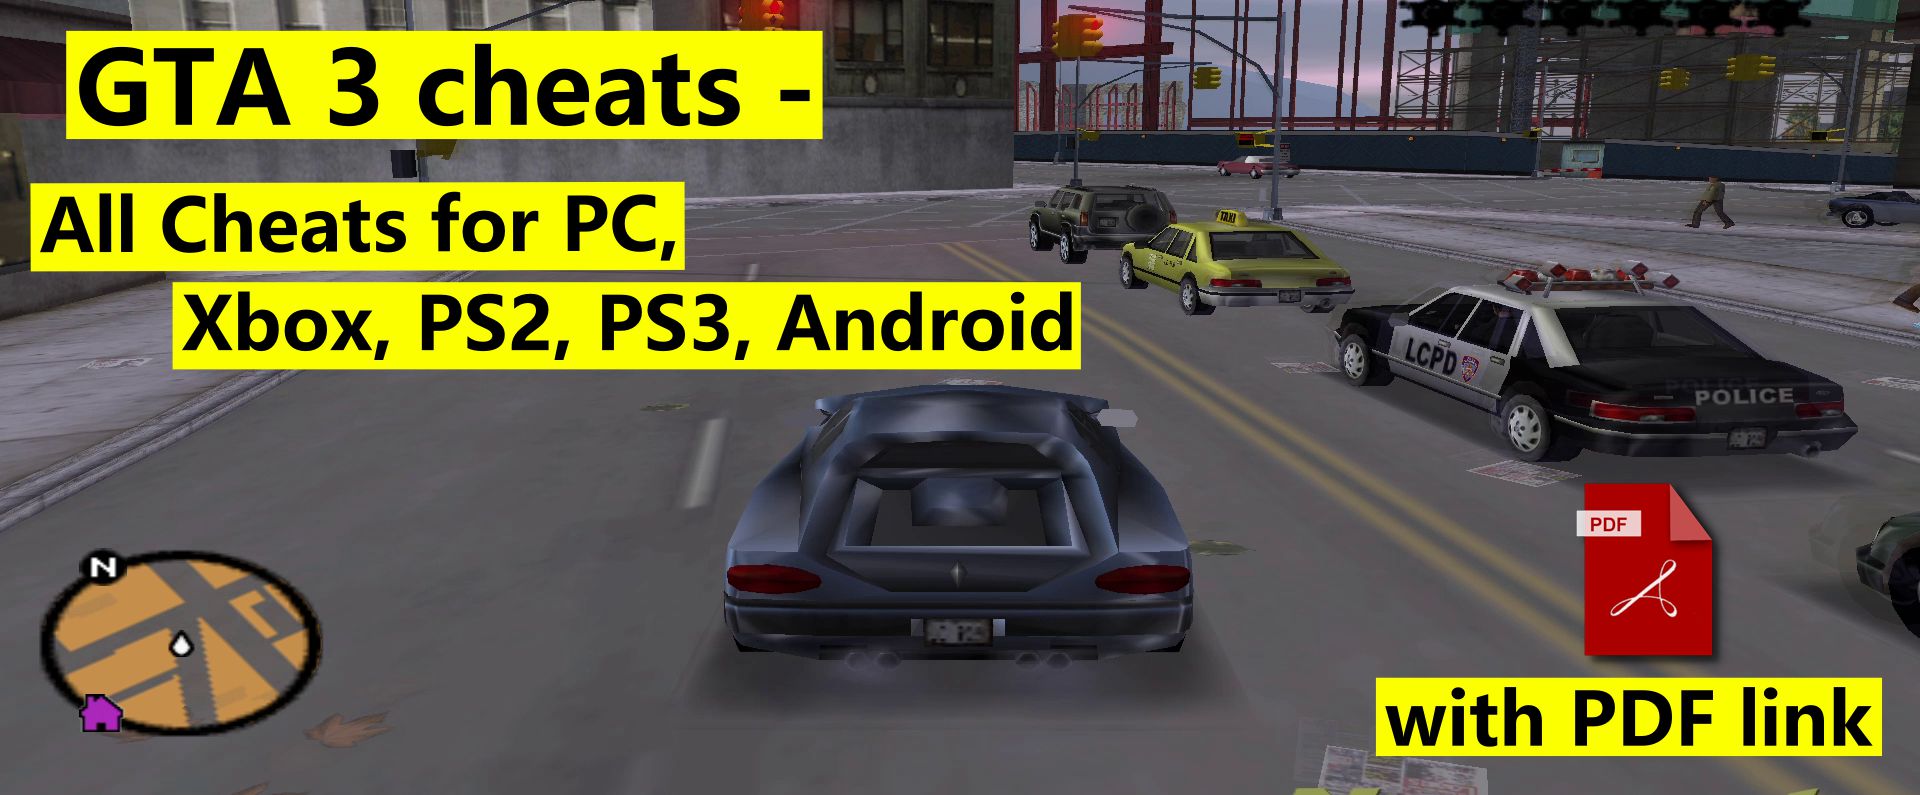 GTA 3 cheats - All Cheats for PC, Xbox, PS2, PS3, Android